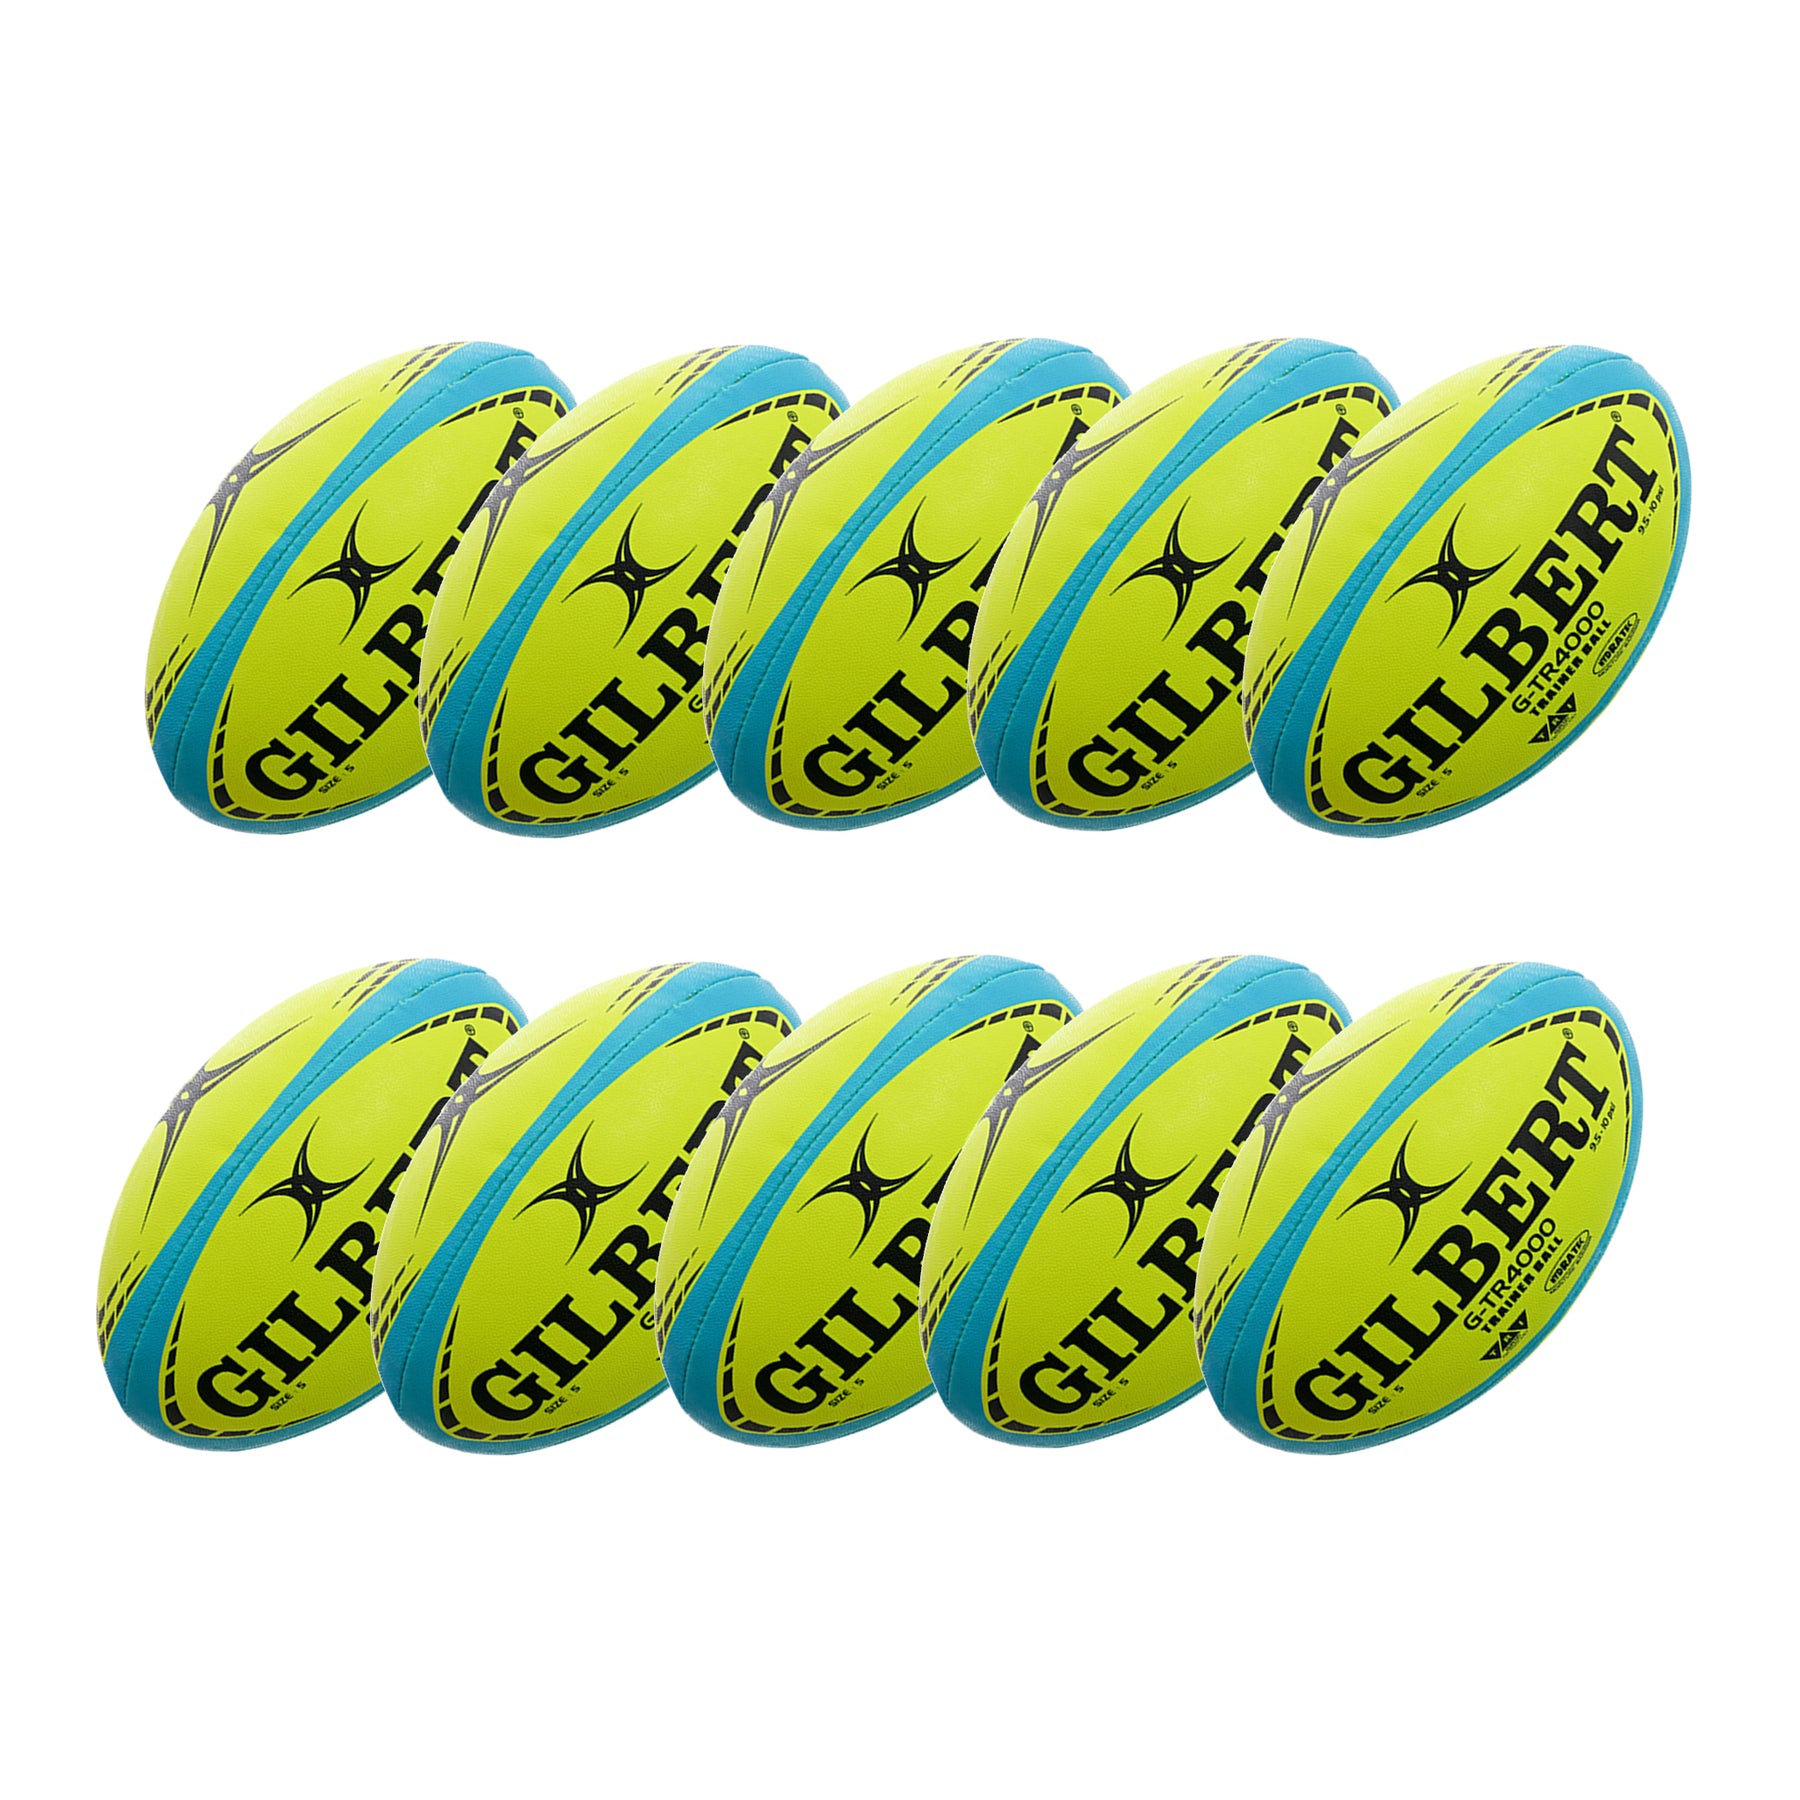 Gilbert G-TR4000 Training Rugby Ball - Size 5 (Pack of 10): Fluo